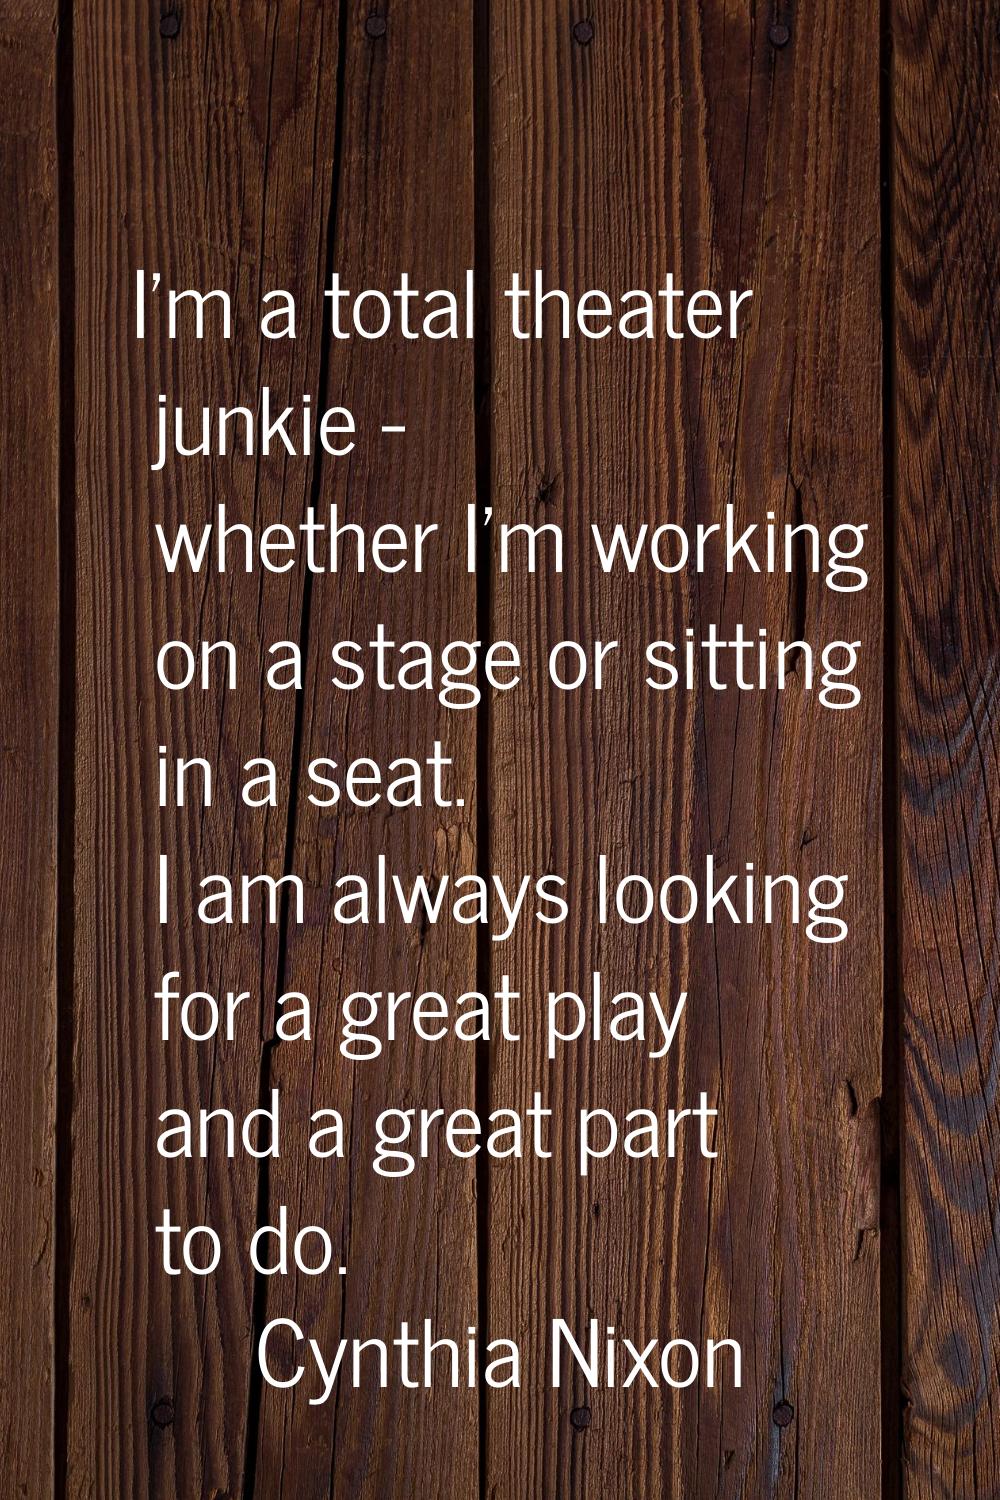 I'm a total theater junkie - whether I'm working on a stage or sitting in a seat. I am always looki